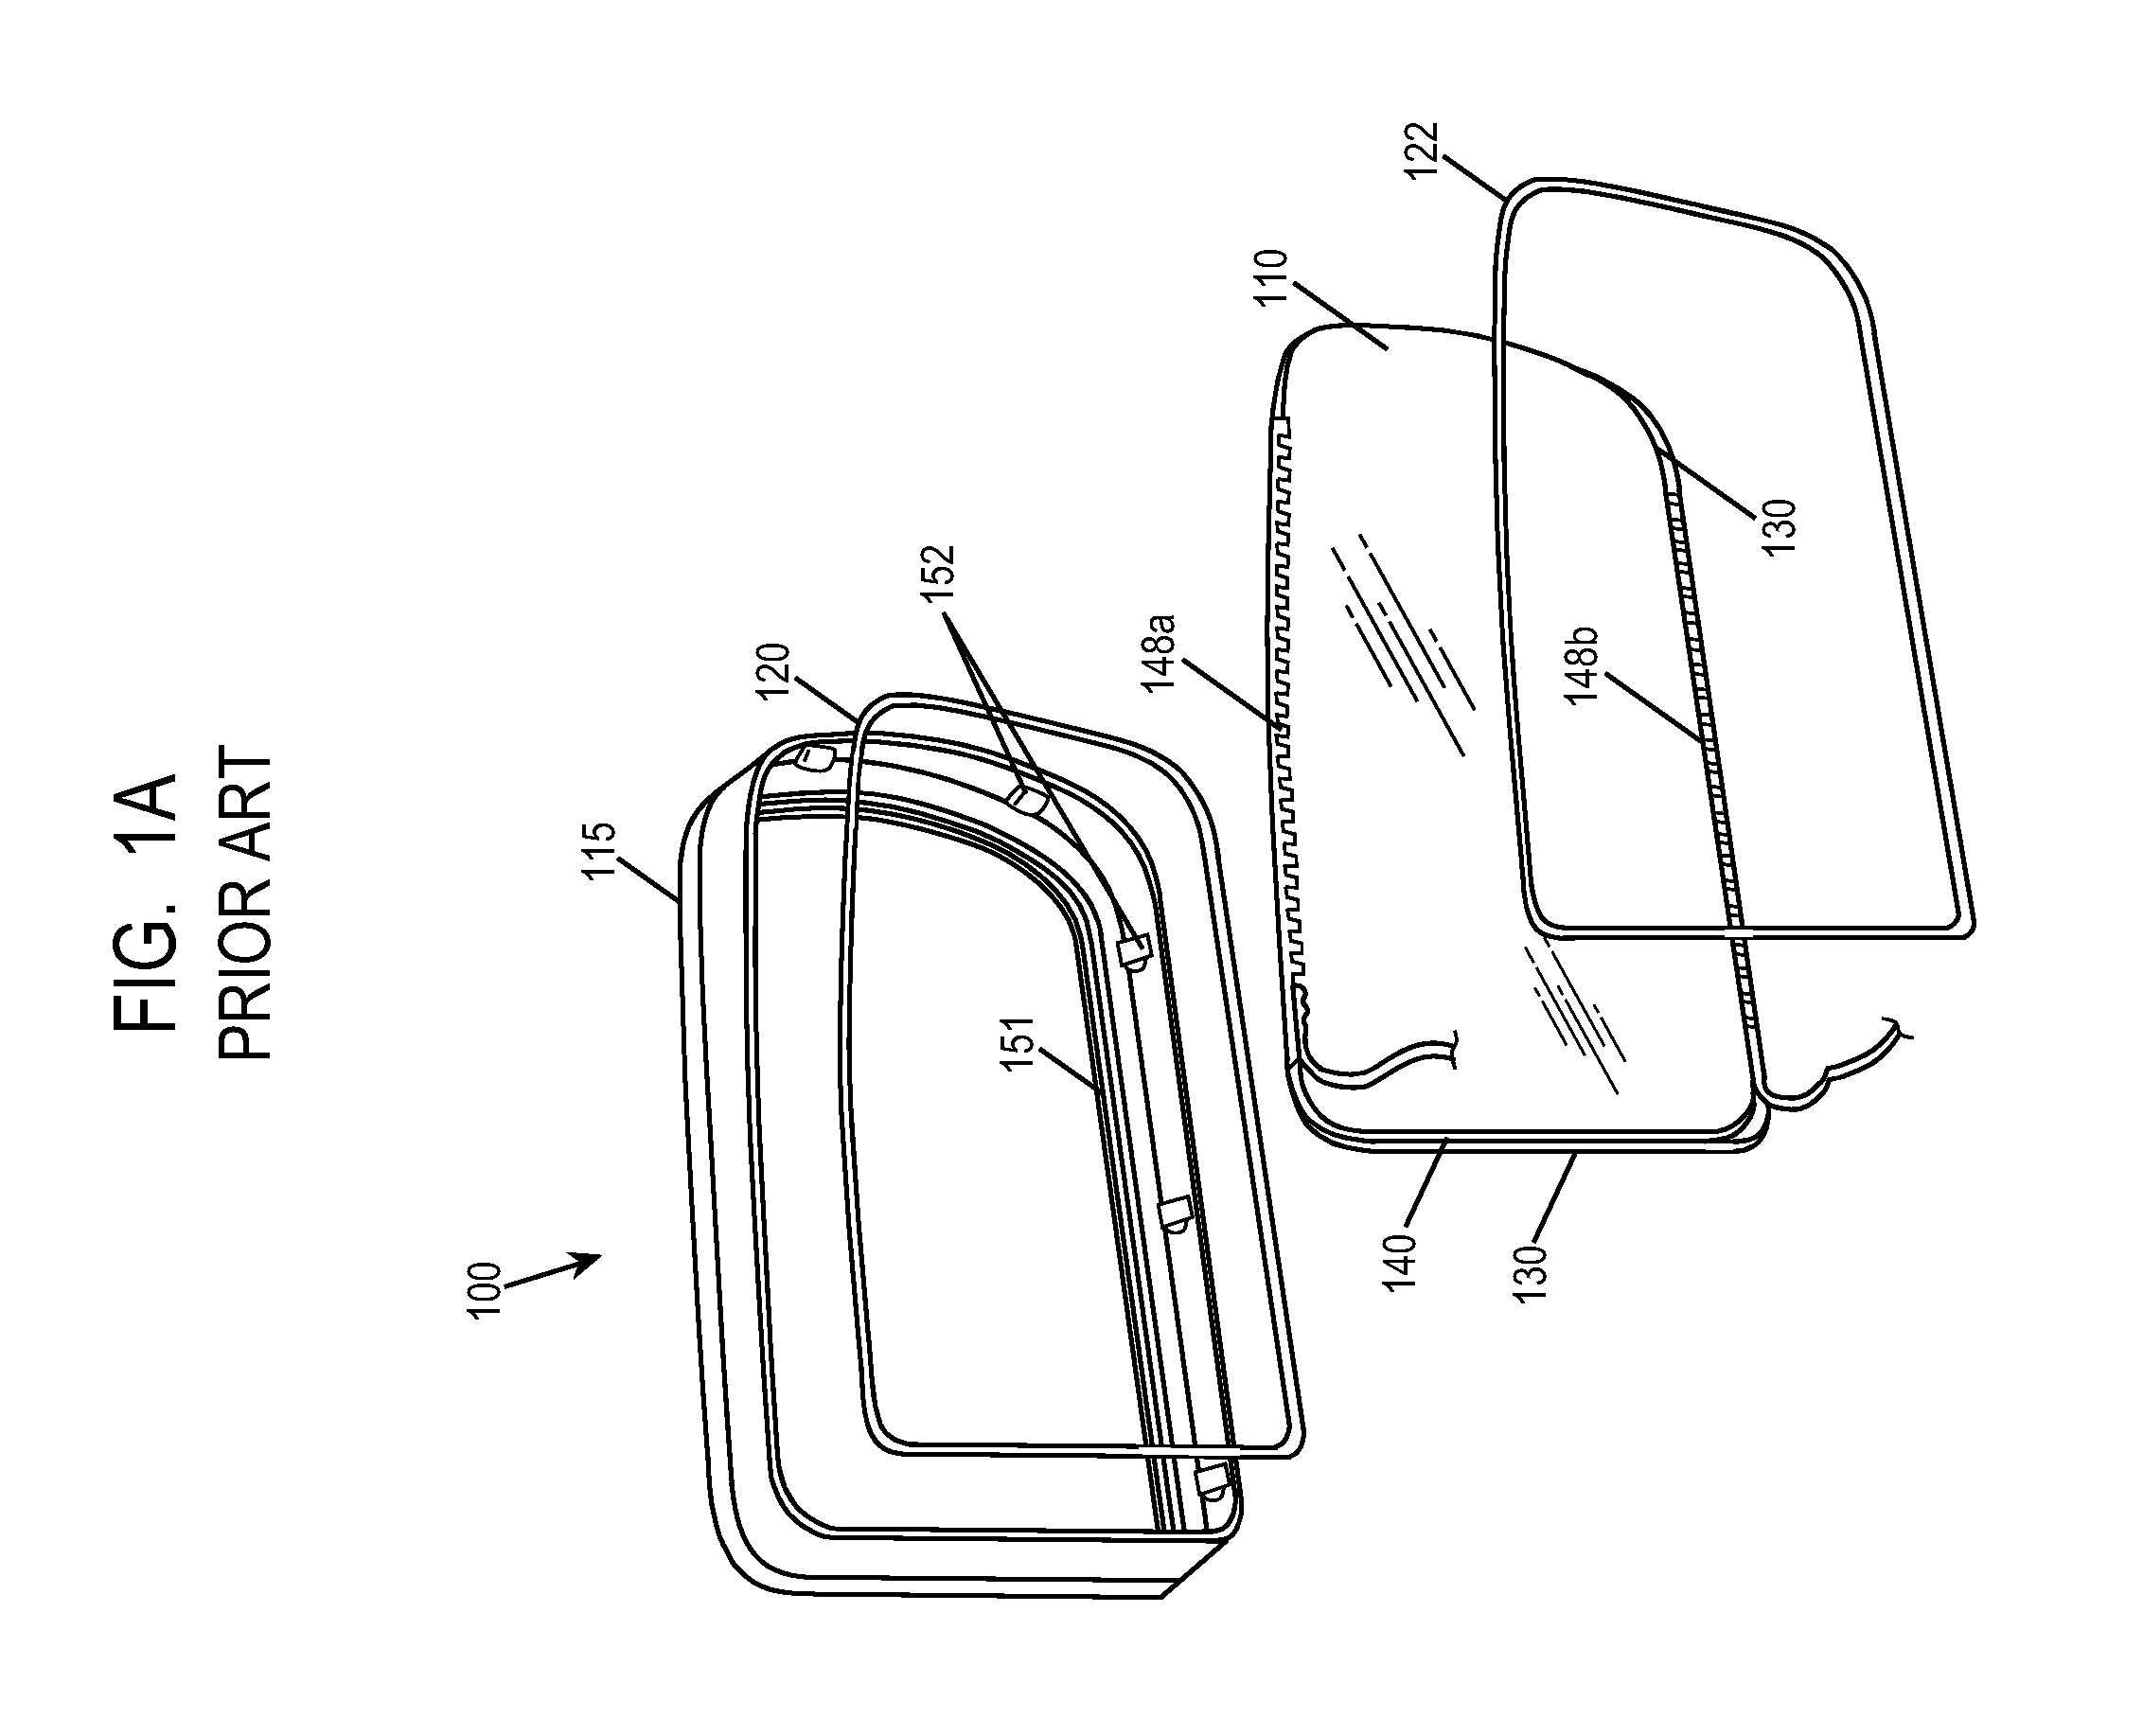 Vehicular Rearview Mirror Elements and Assemblies Incorporating These Elements